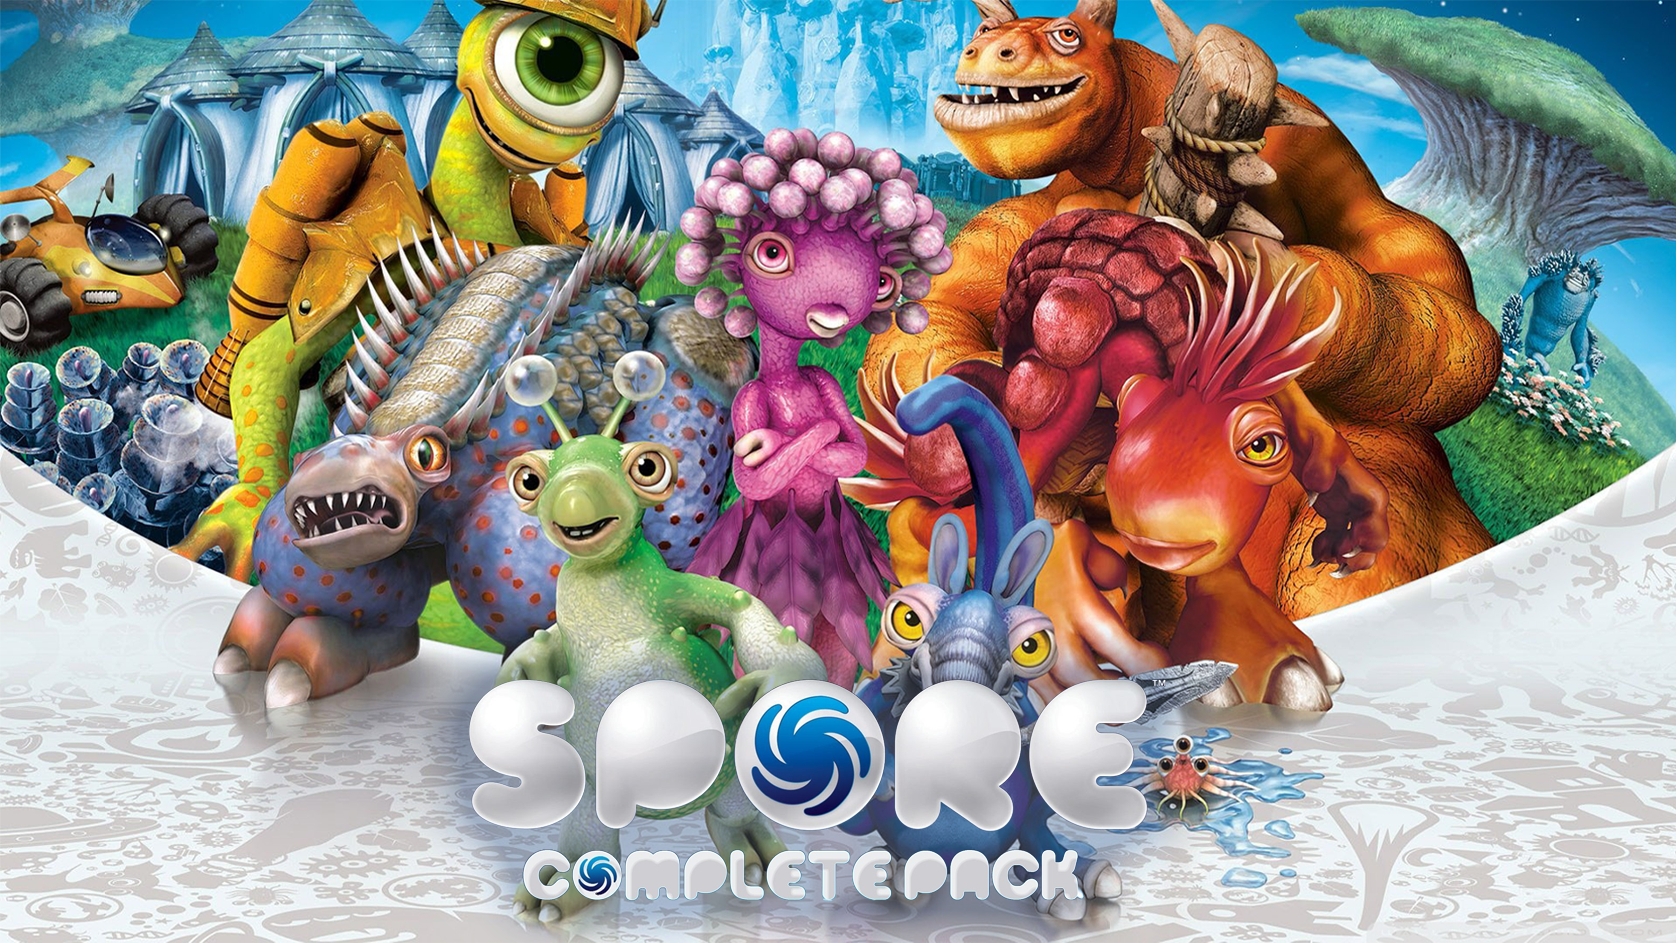 spore game playstation 3